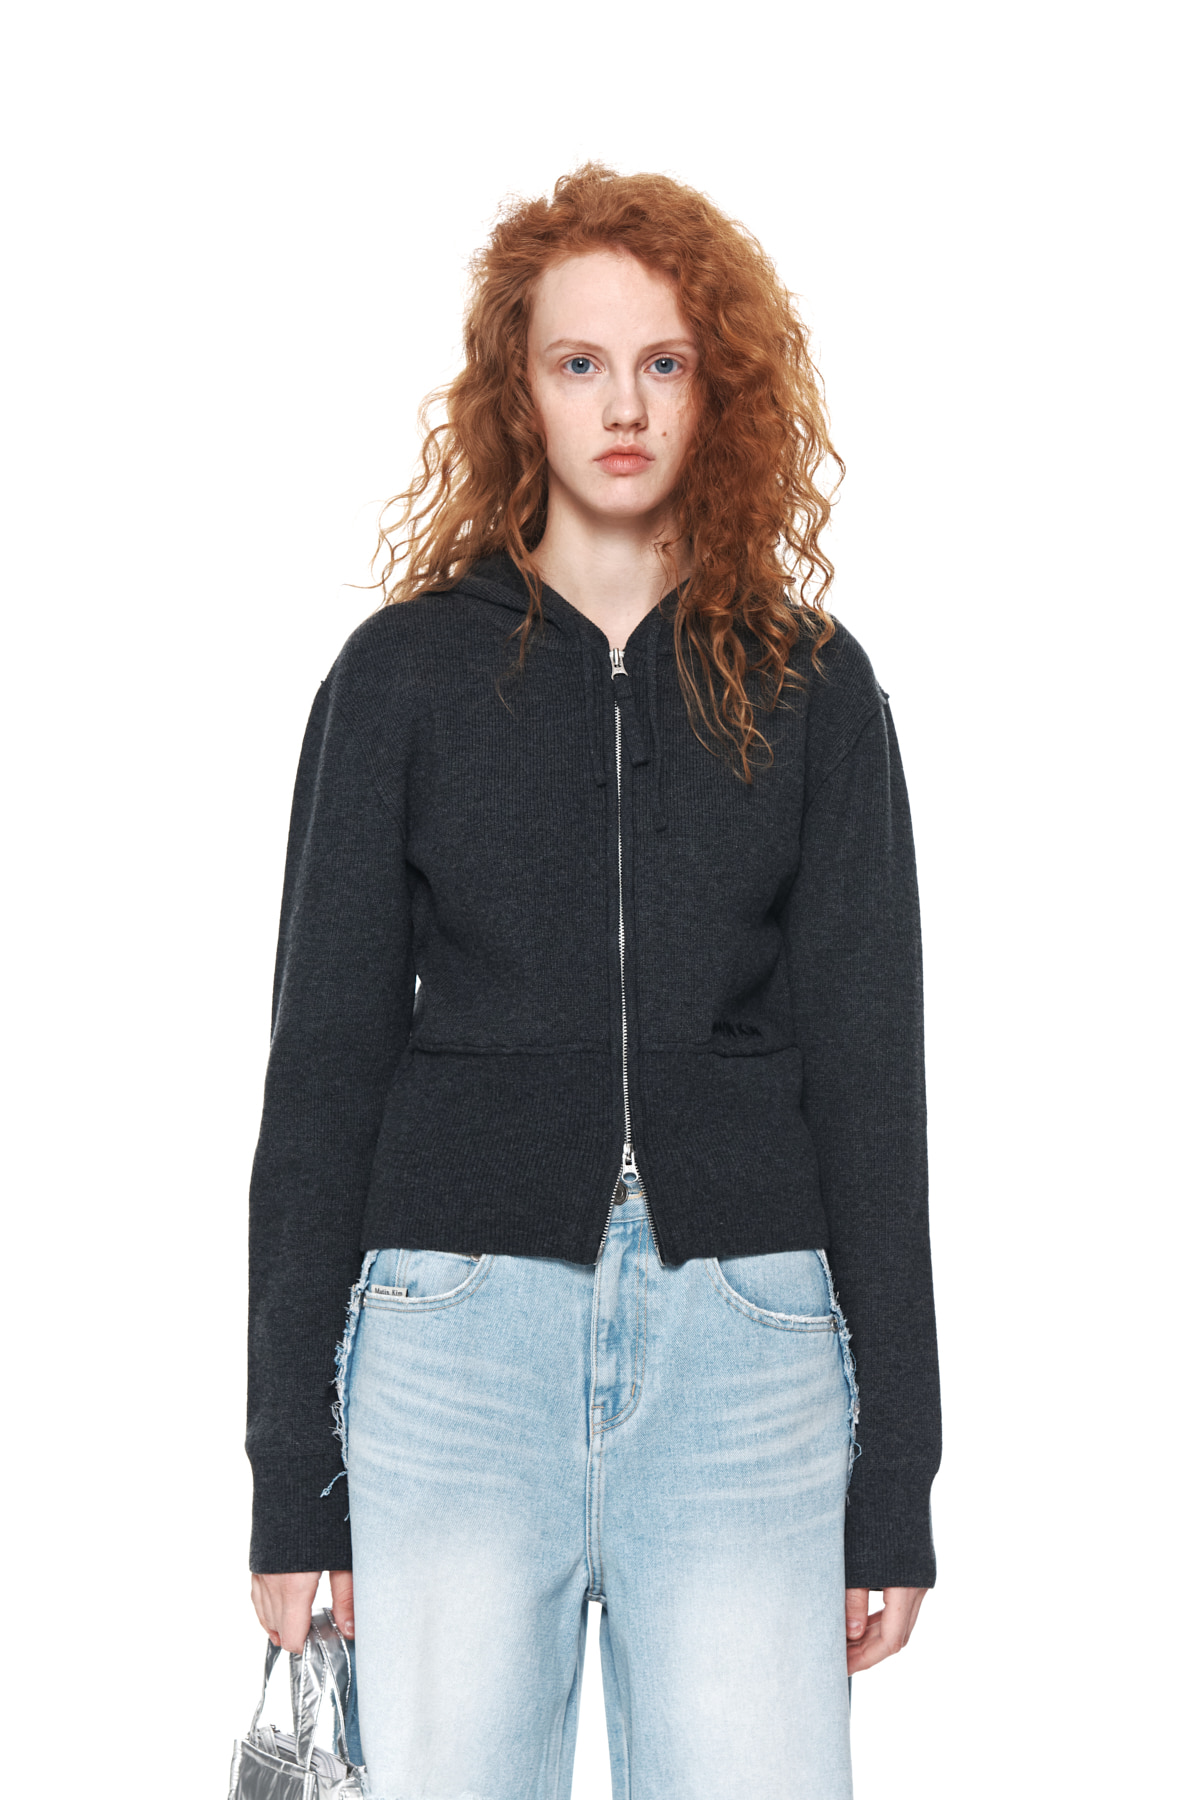 RIBBED KNIT HOODY ZIP UP FOR WOMEN IN CHARCOAL